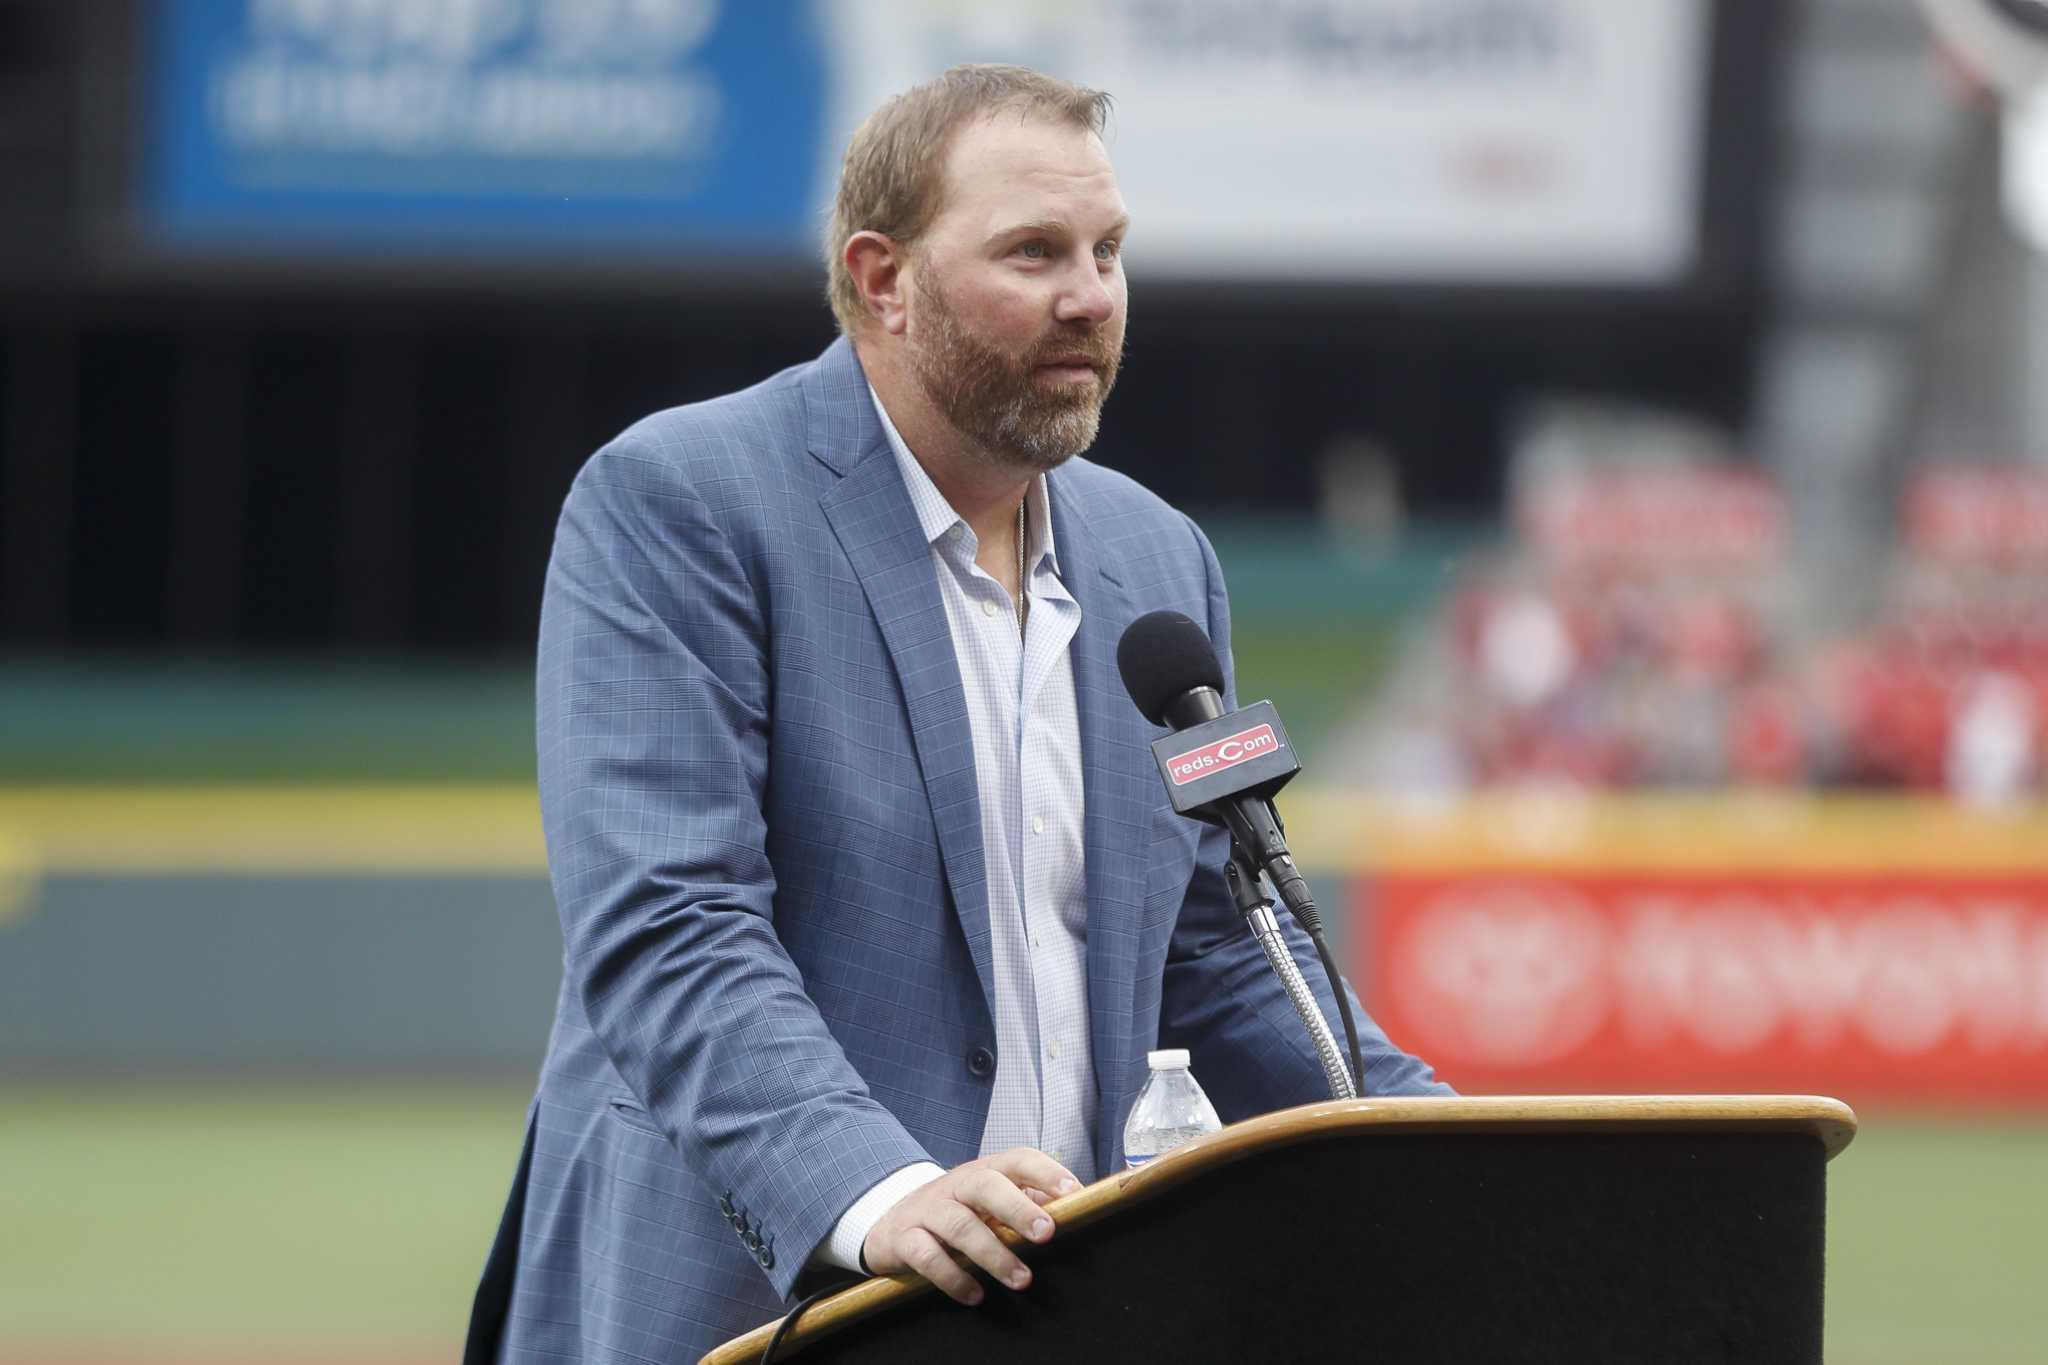 ALUMNI NOTEBOOK: New Caney native Adam Dunn inducted into Reds Hall of Fame